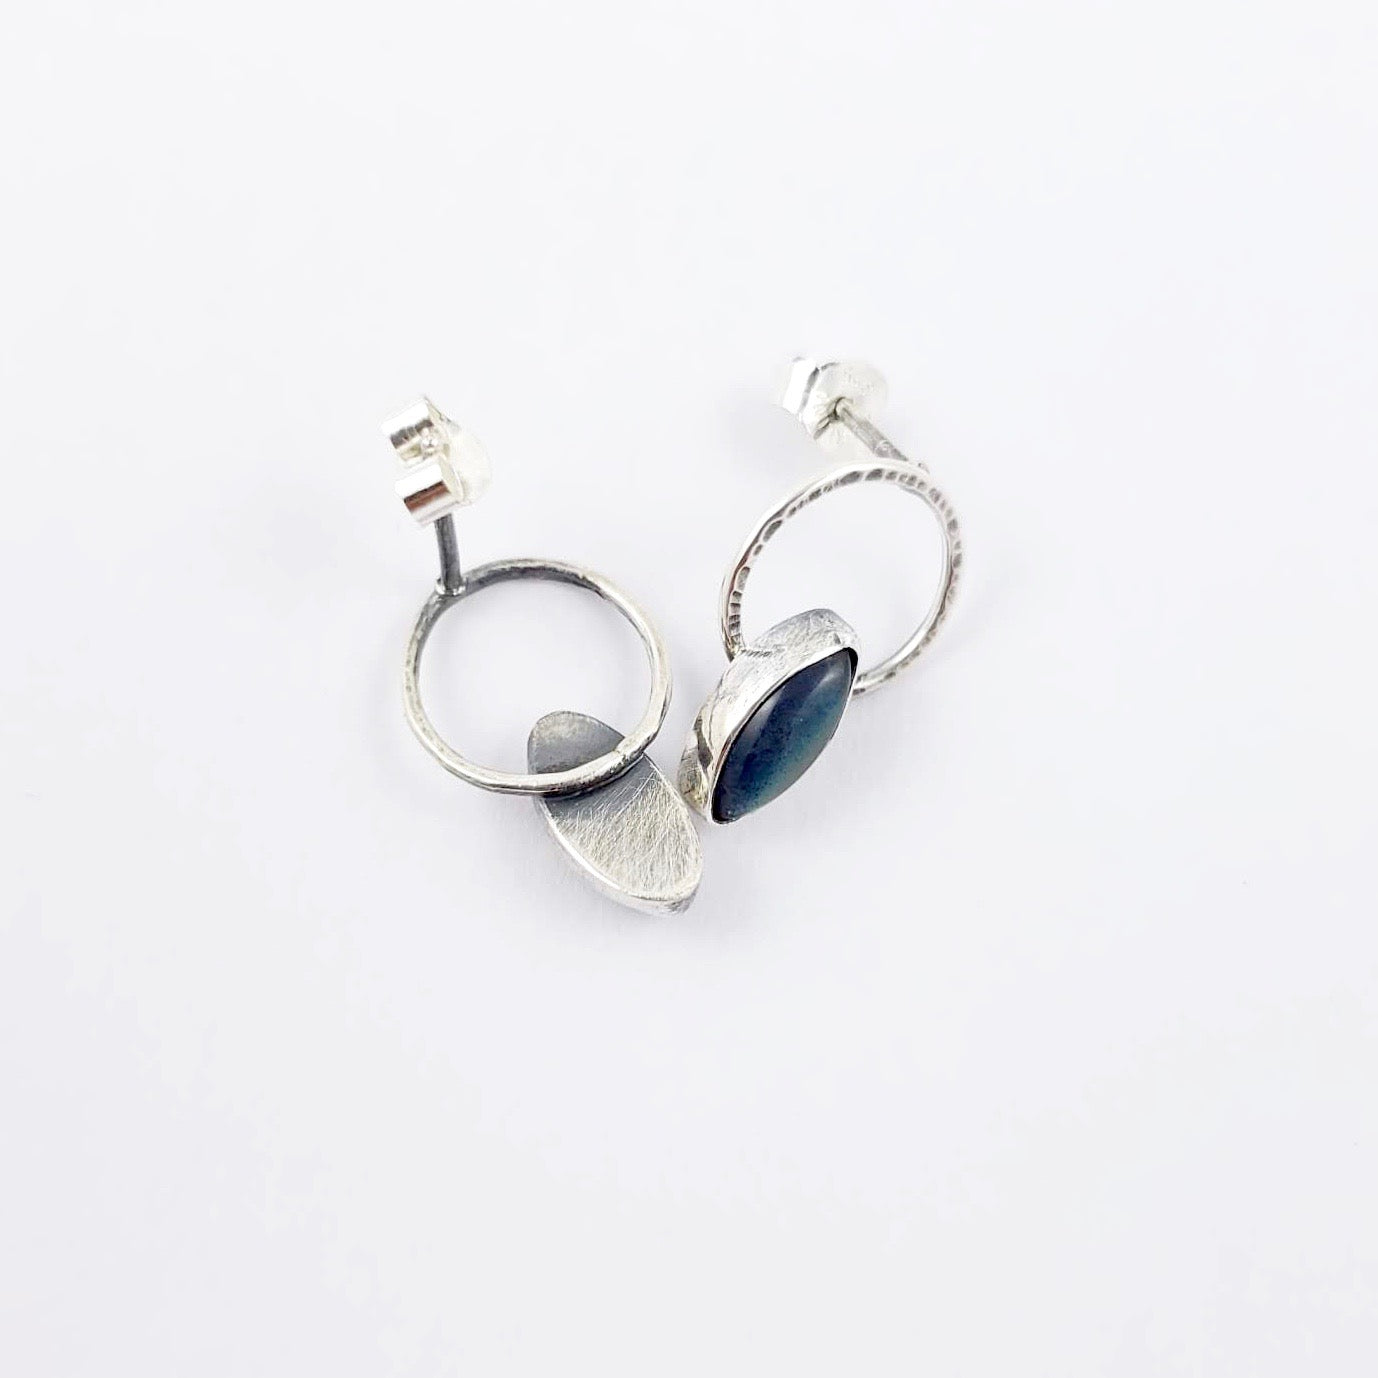 IRIS - "The Seer" Labradorite and Sterling Silver Studs